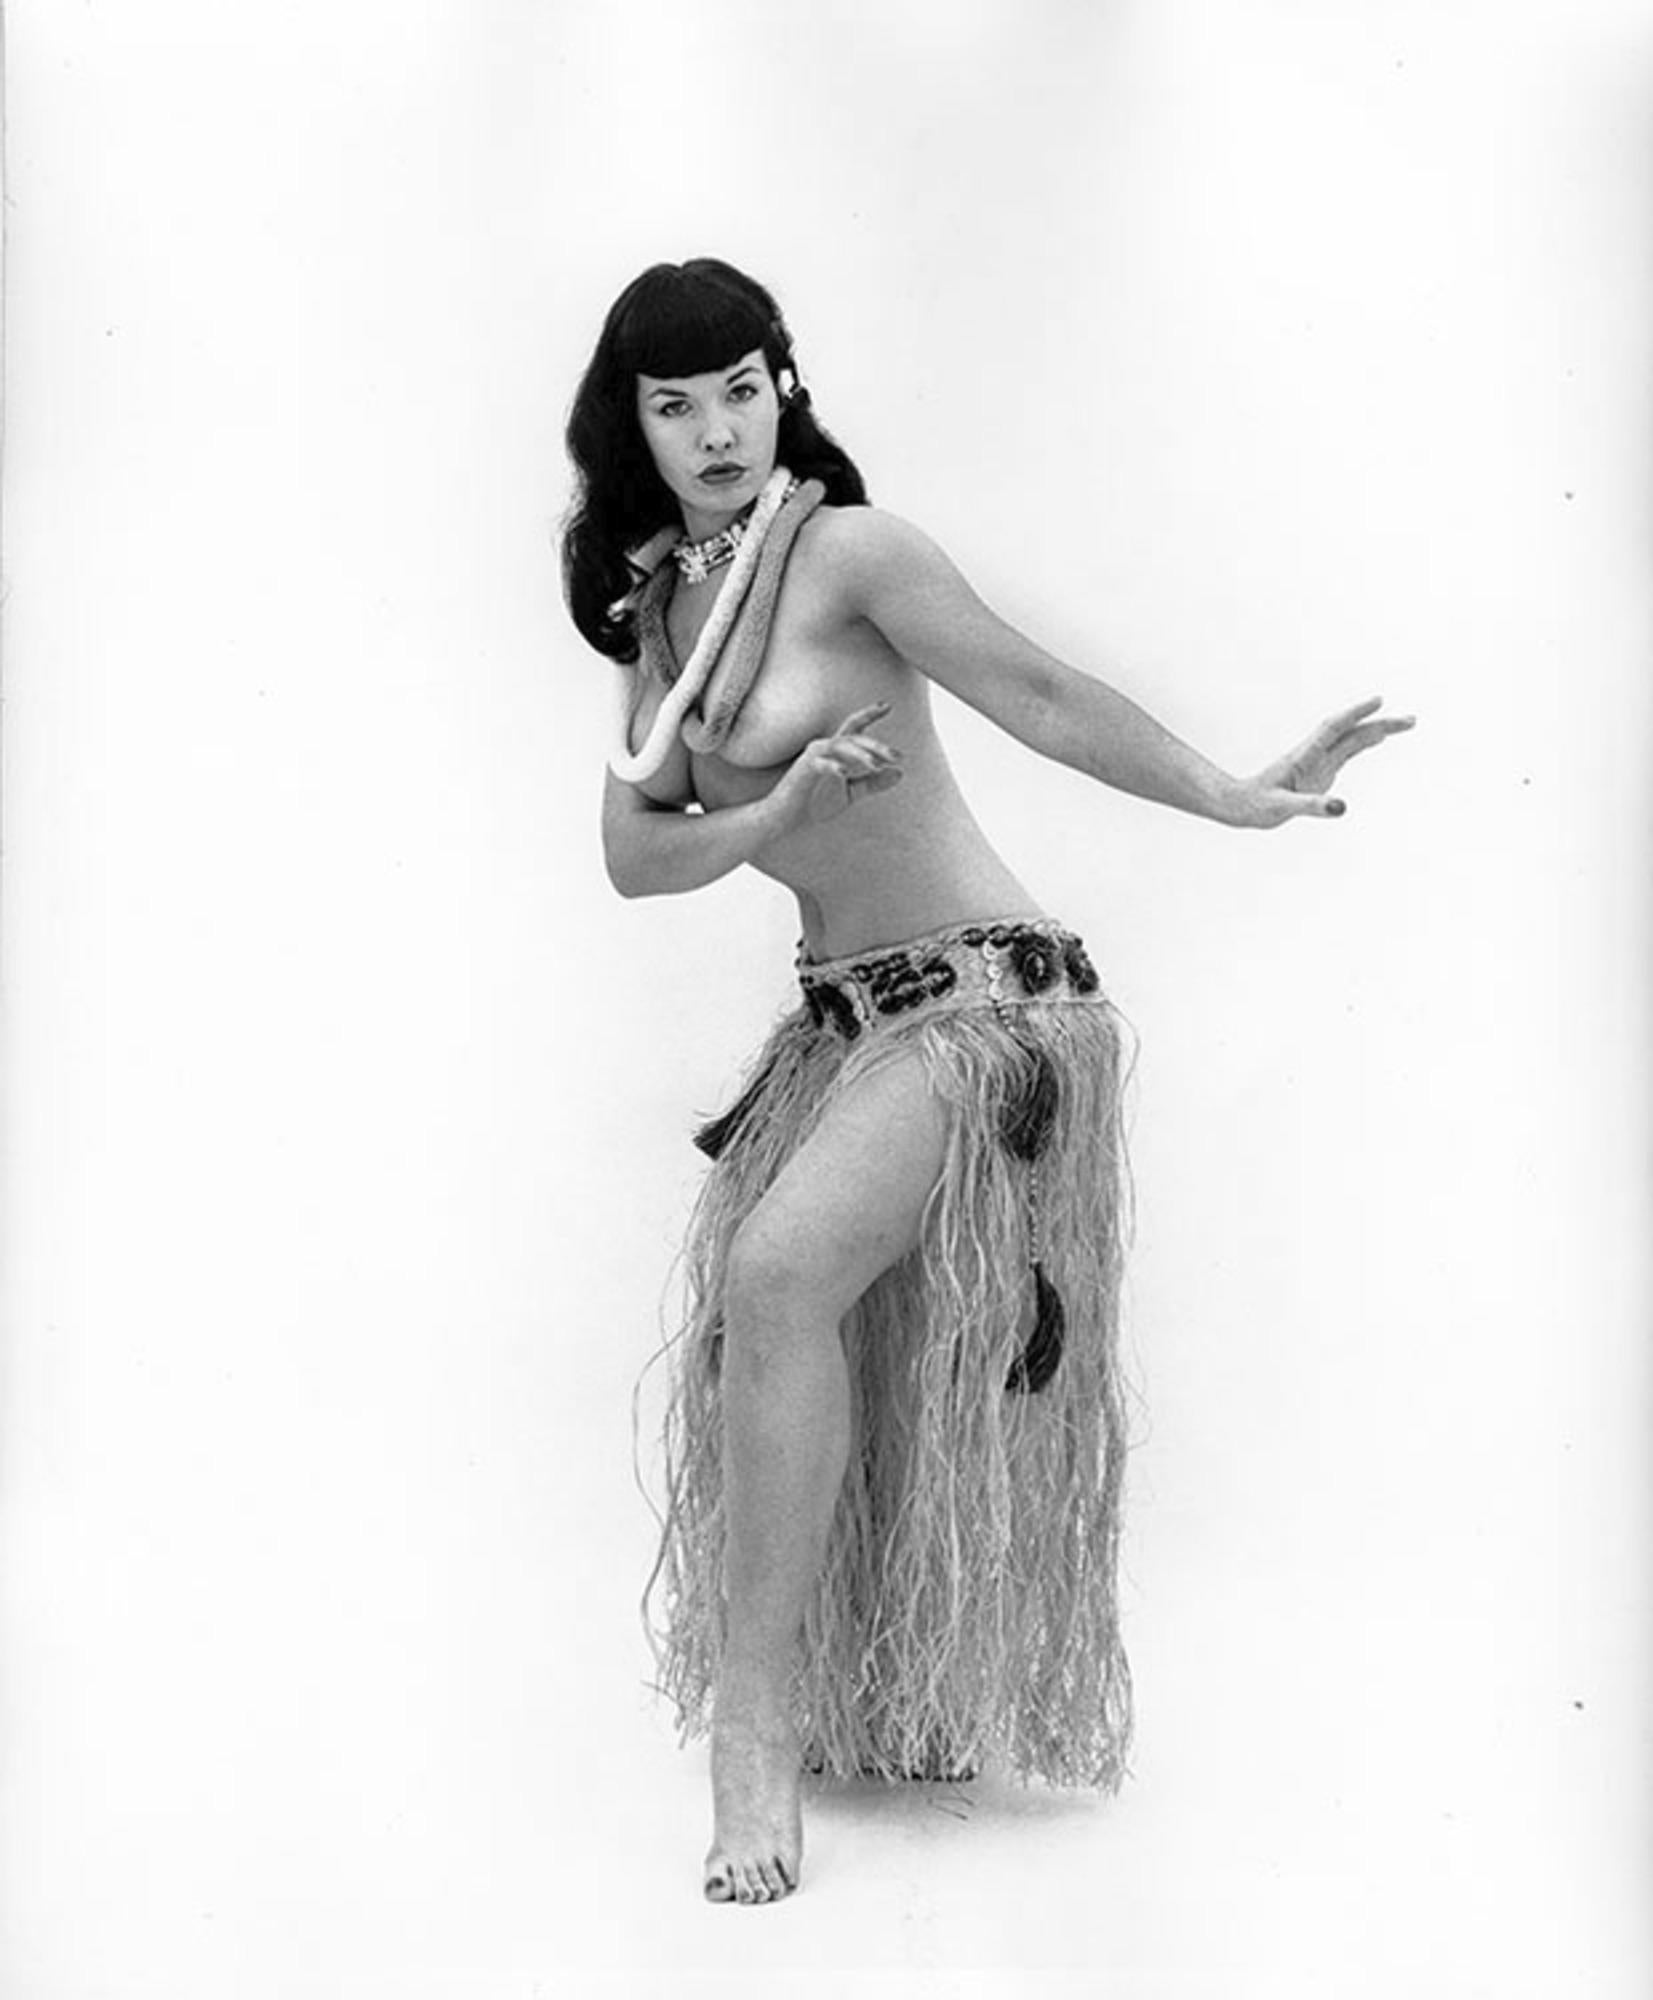 Gelatin-silver print

Posing as a Hula Dancer for a story in in Foto-Rama Magazine, NYC, December 1965

Available Sizes:
12" x 16” Edition of 25
16” x 20” Edition of 25
20" x 24” Edition of 25
30” x 40” Edition of 25

This photograph will be printed